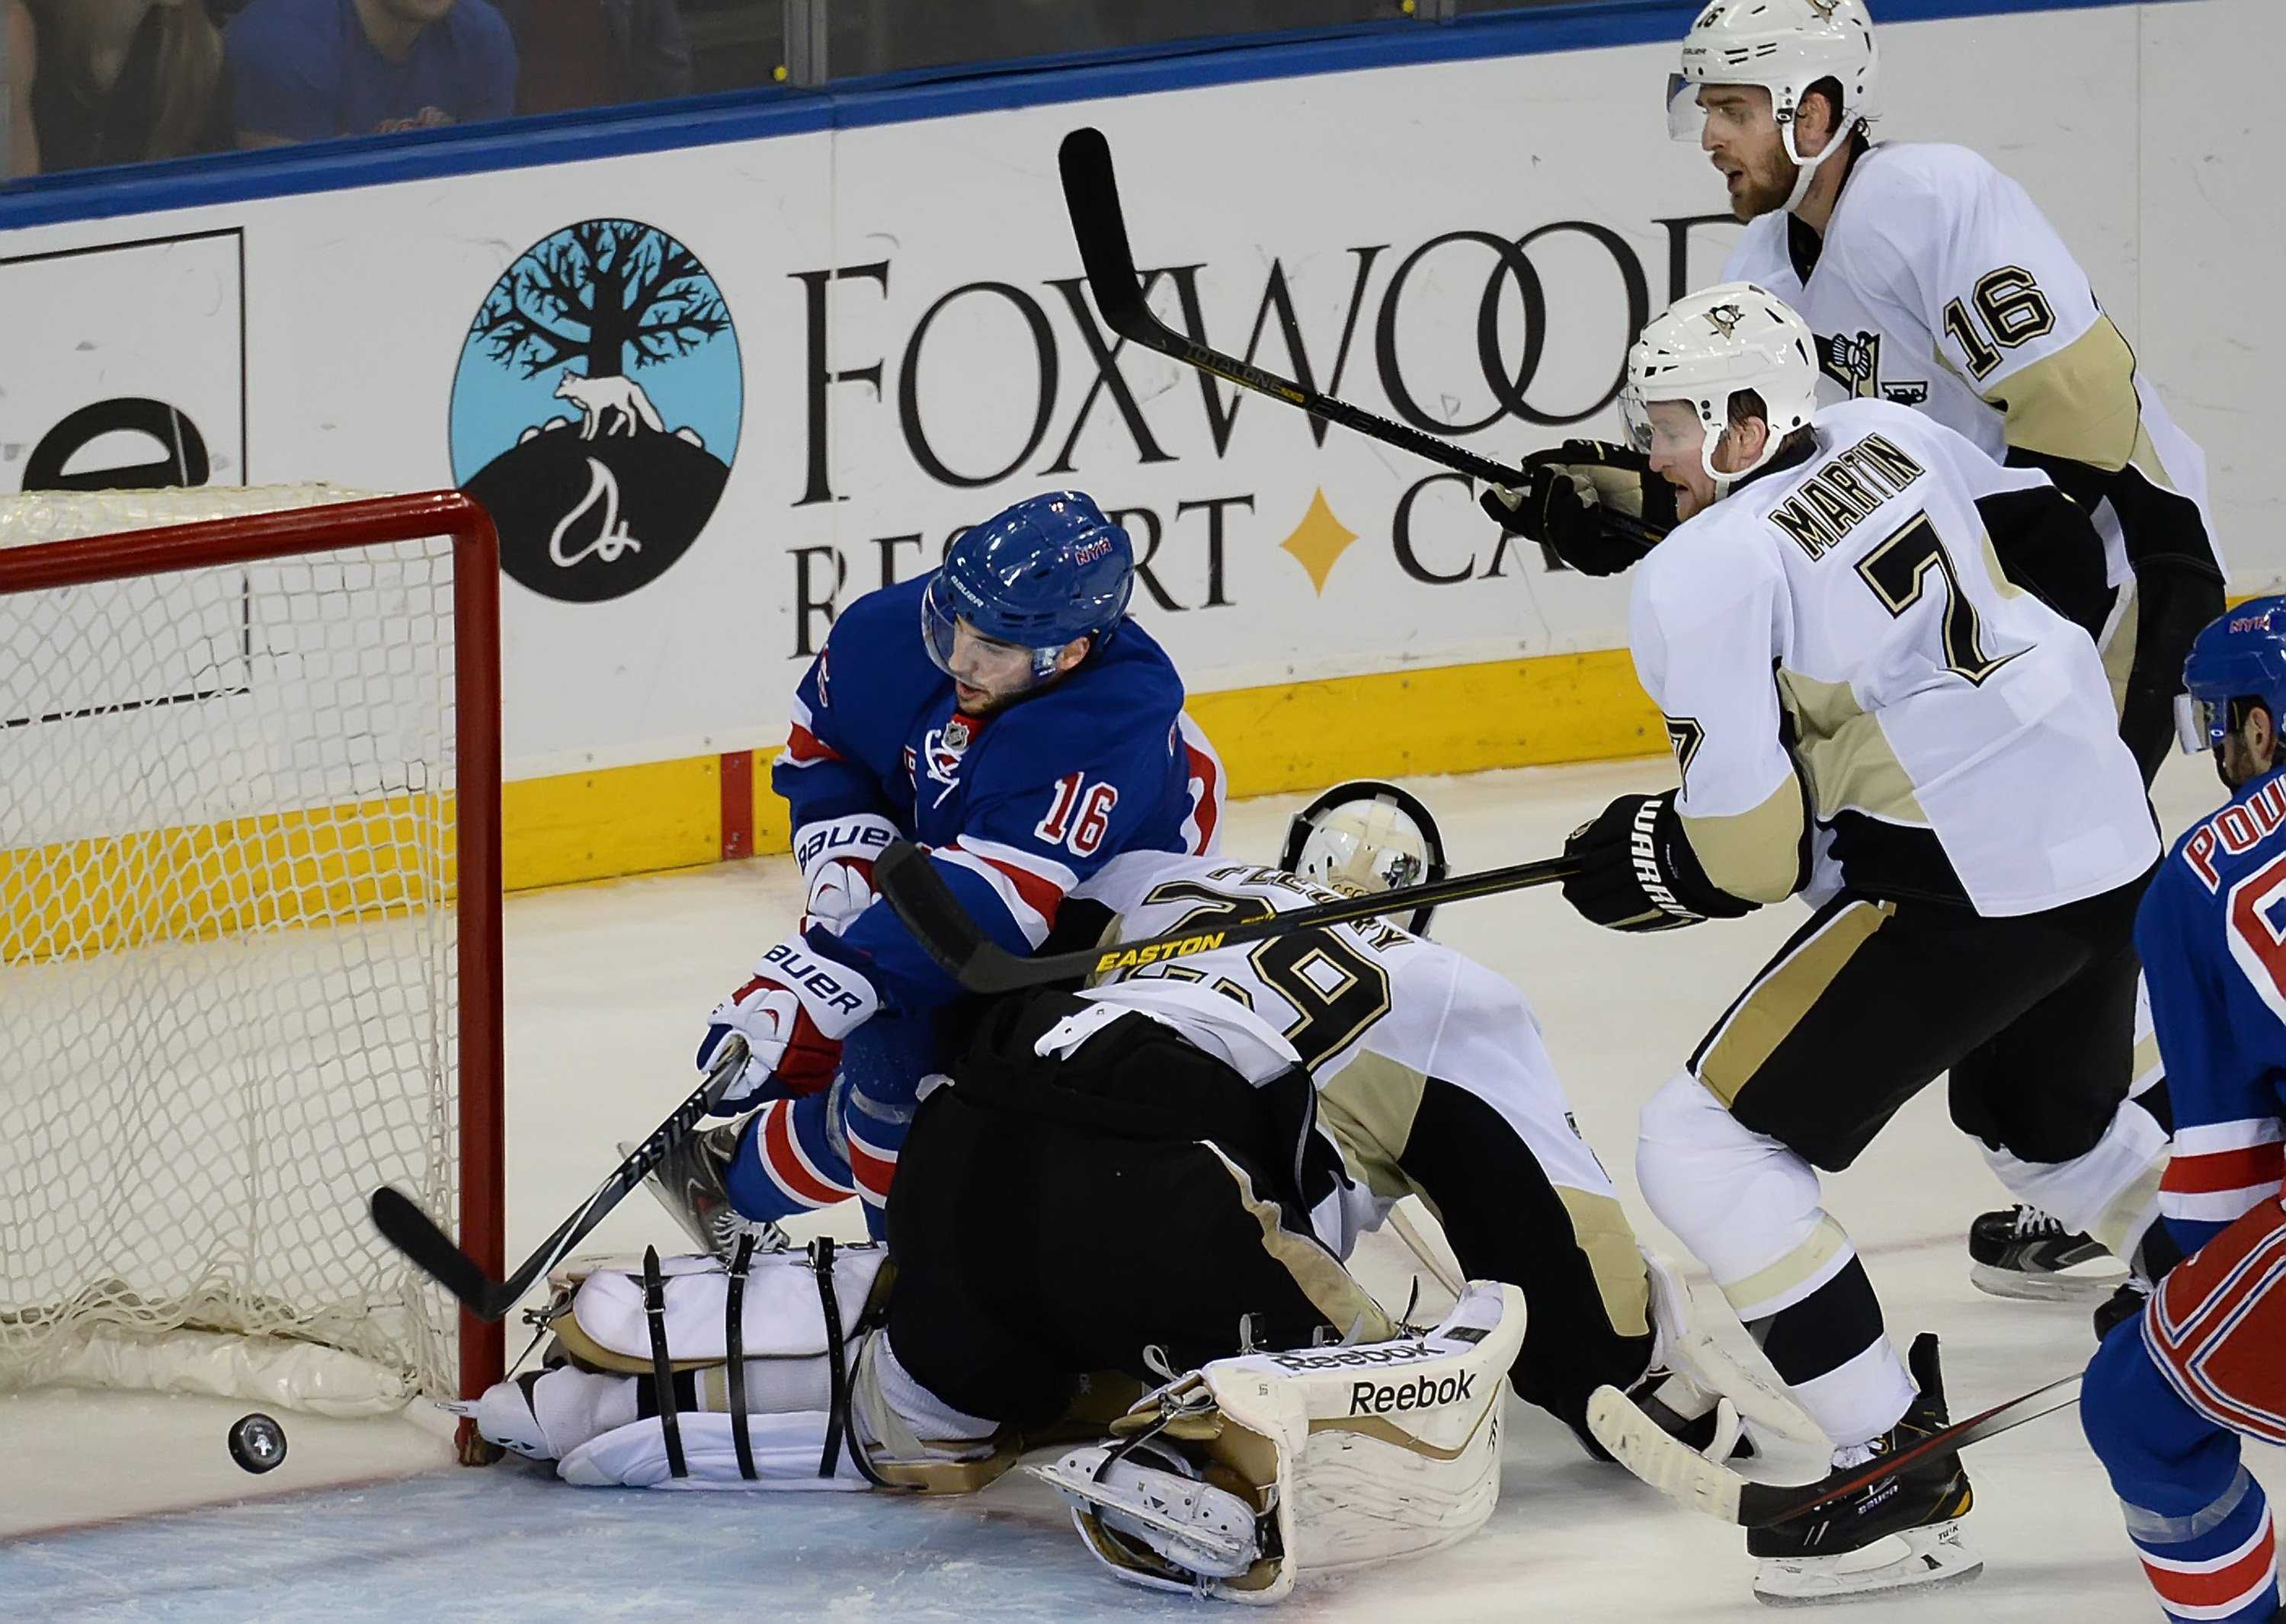 Derick Brassard of the New York Rangers pushes the puck over the goal line behind Pittsburgh Penguins goaltender Marc-Andre Fleury. The Rangers defeated the Penguins, 3-1, in Game 6 of the NHL Eastern Conference playoffs at Madison Square Garden in New York in last years NHL playoffs on Sunday, May 11, 2014. (Peter Diana/Pittsburgh Post-Gazette/MCT)